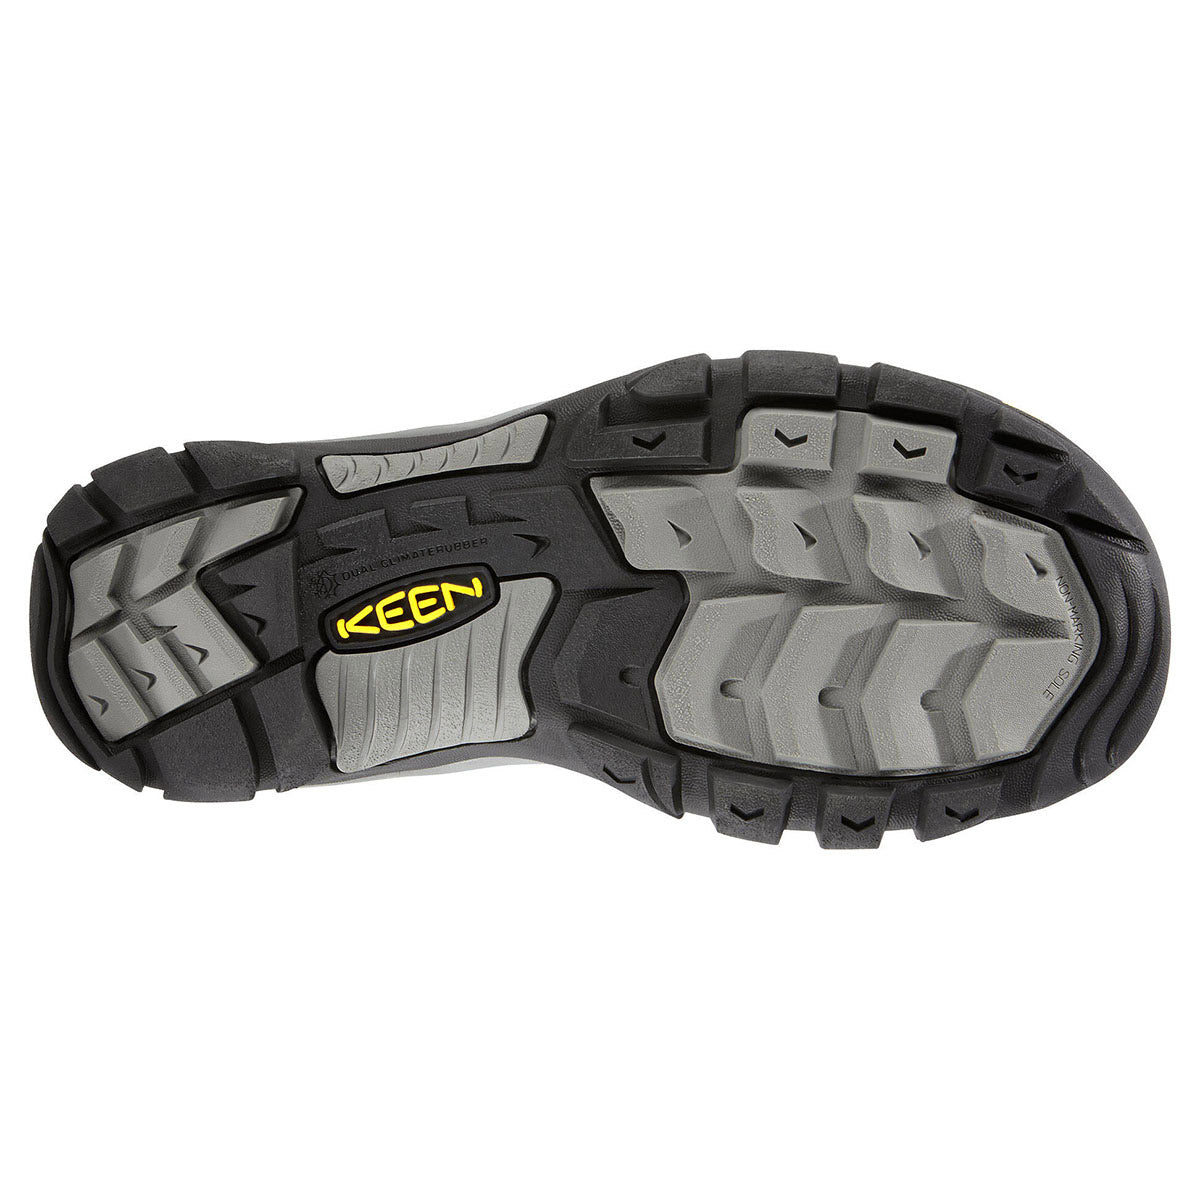 Durable Keen KEEN.Dry waterproof outsole of a hiking shoe with tread pattern and brand logo.